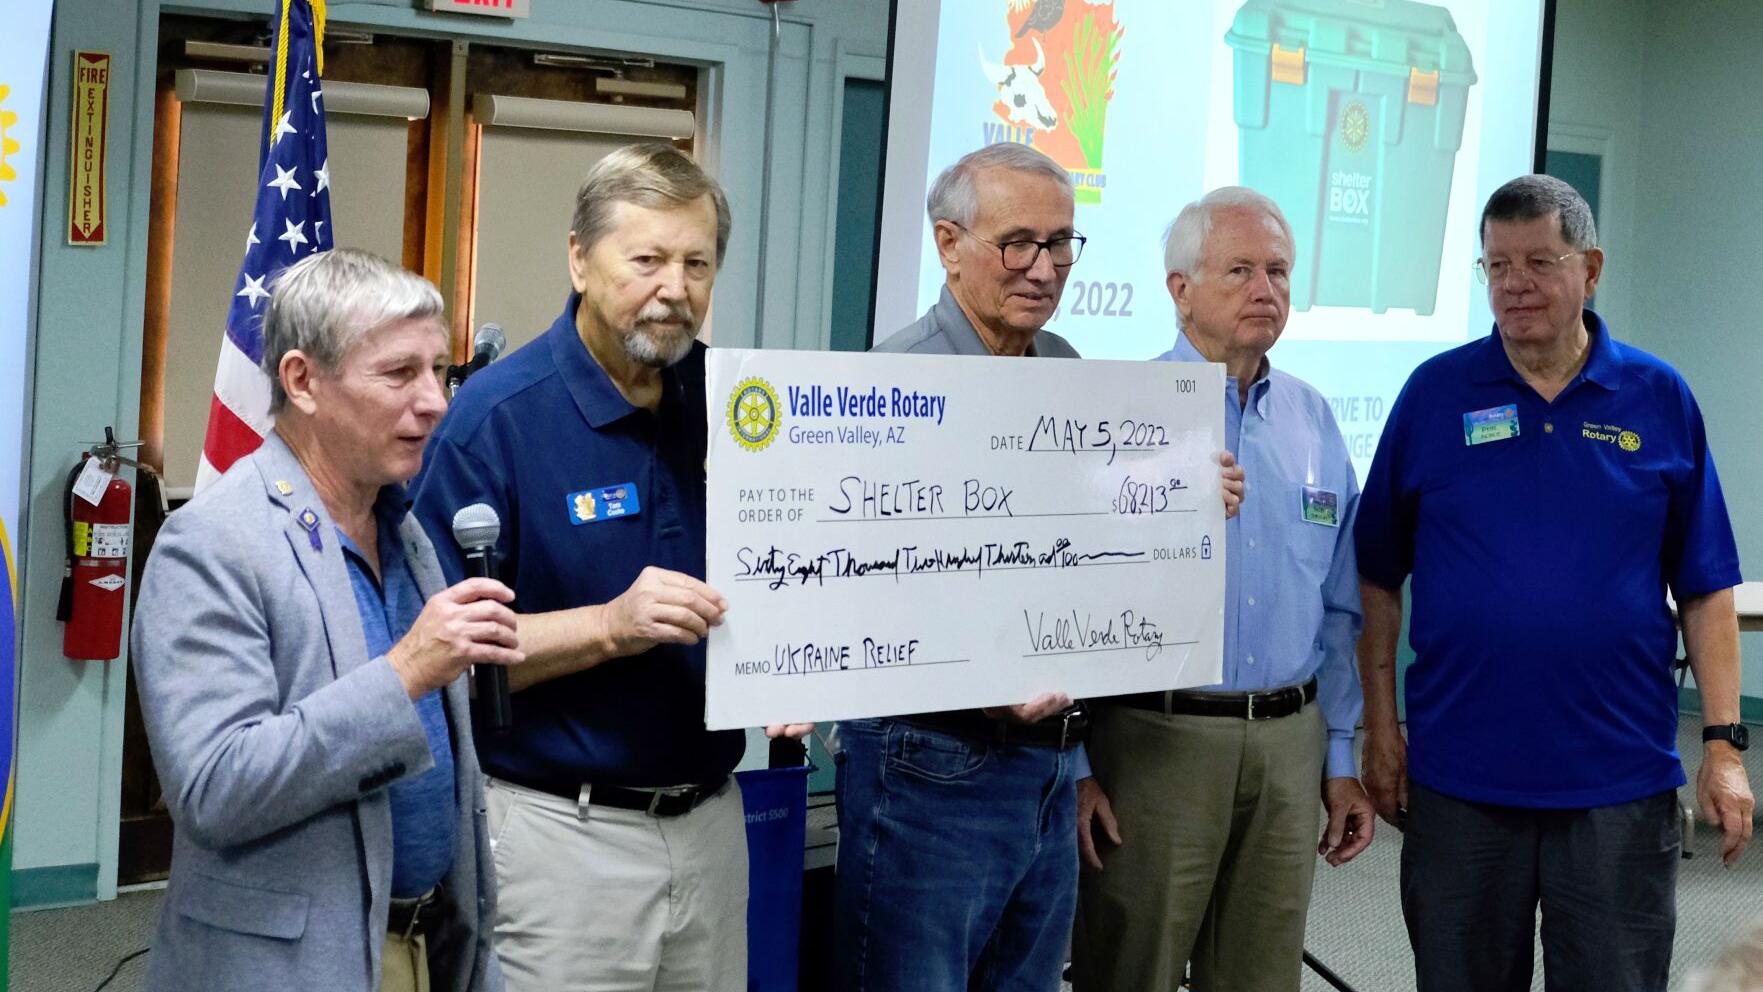 Green Valley area Rotary Clubs donate $68K for Ukrainian relief efforts